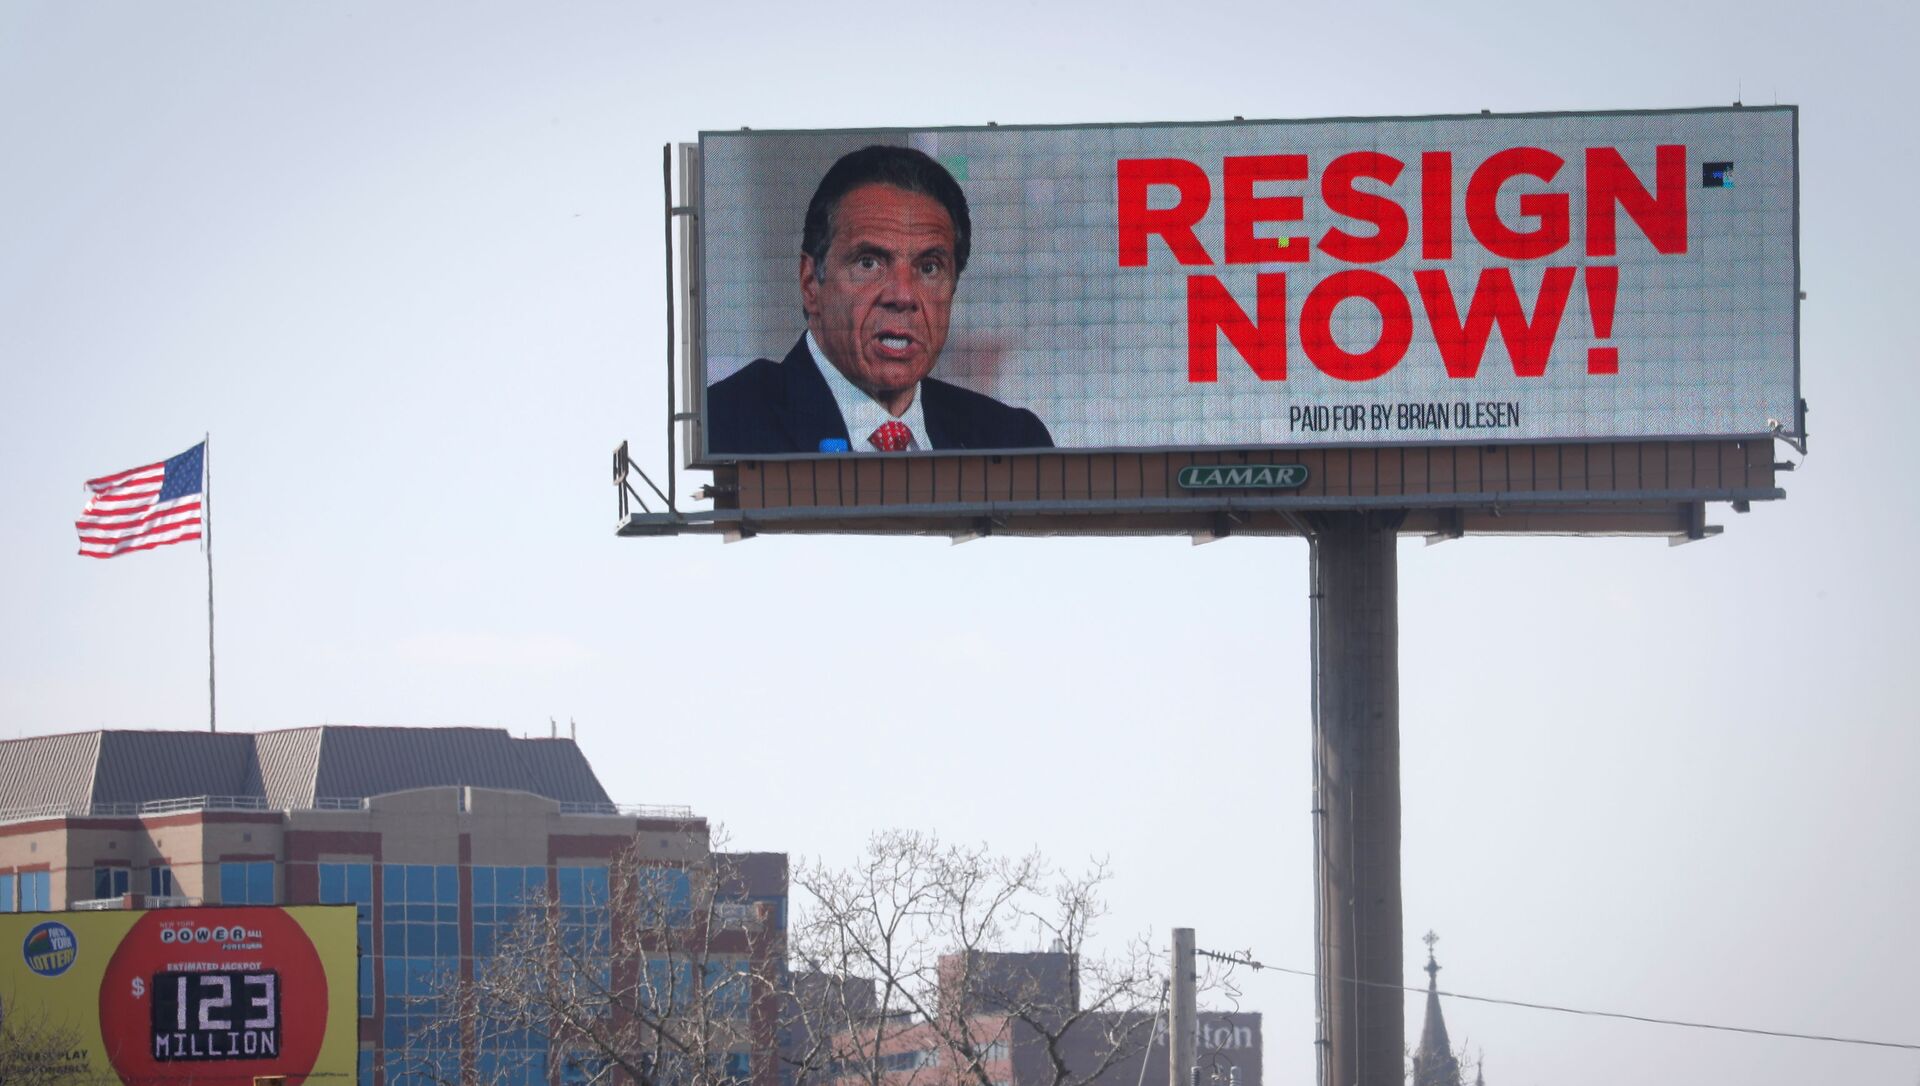 Electronic billboard displays message for New York Governor Cuomo to Resign Now in Albany - Sputnik International, 1920, 05.08.2021